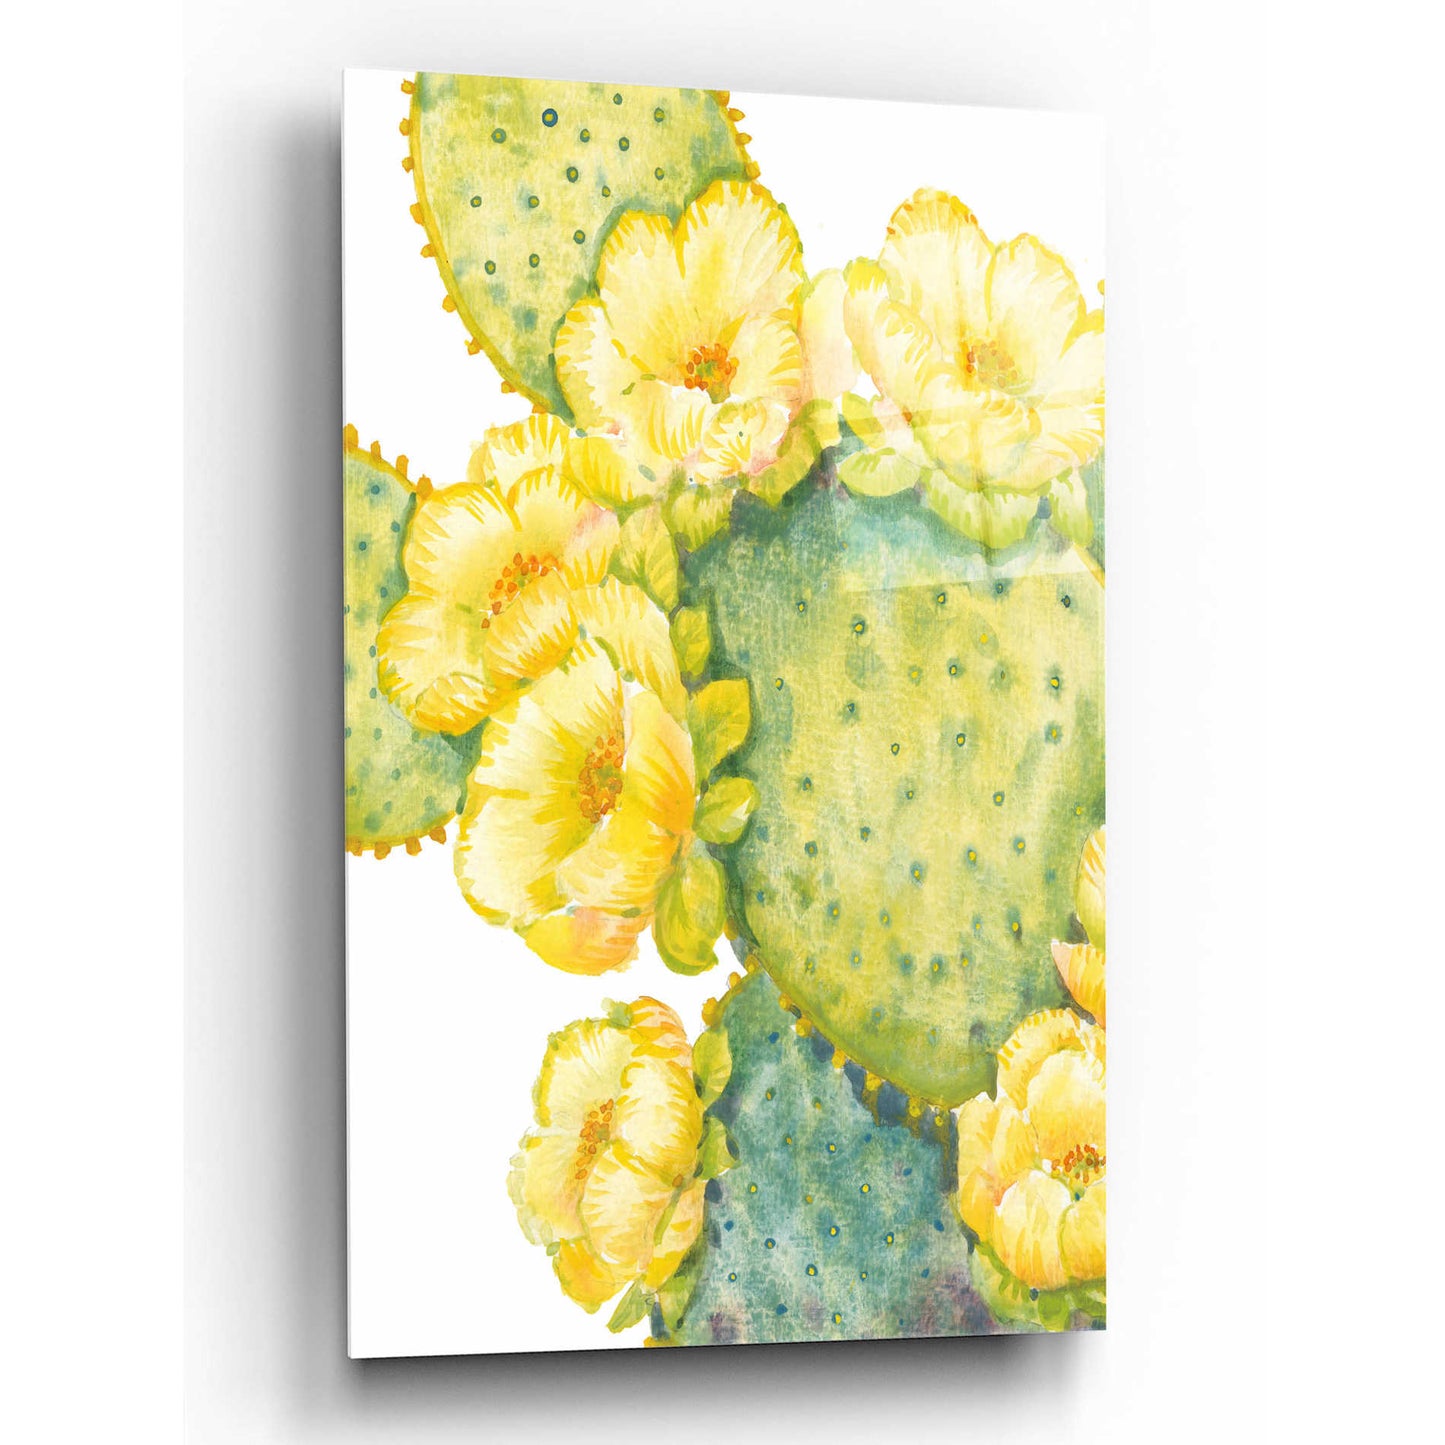 Epic Art 'Cactus on Silver I' by Tim O'Toole, Acrylic Glass Wall Art,16x24